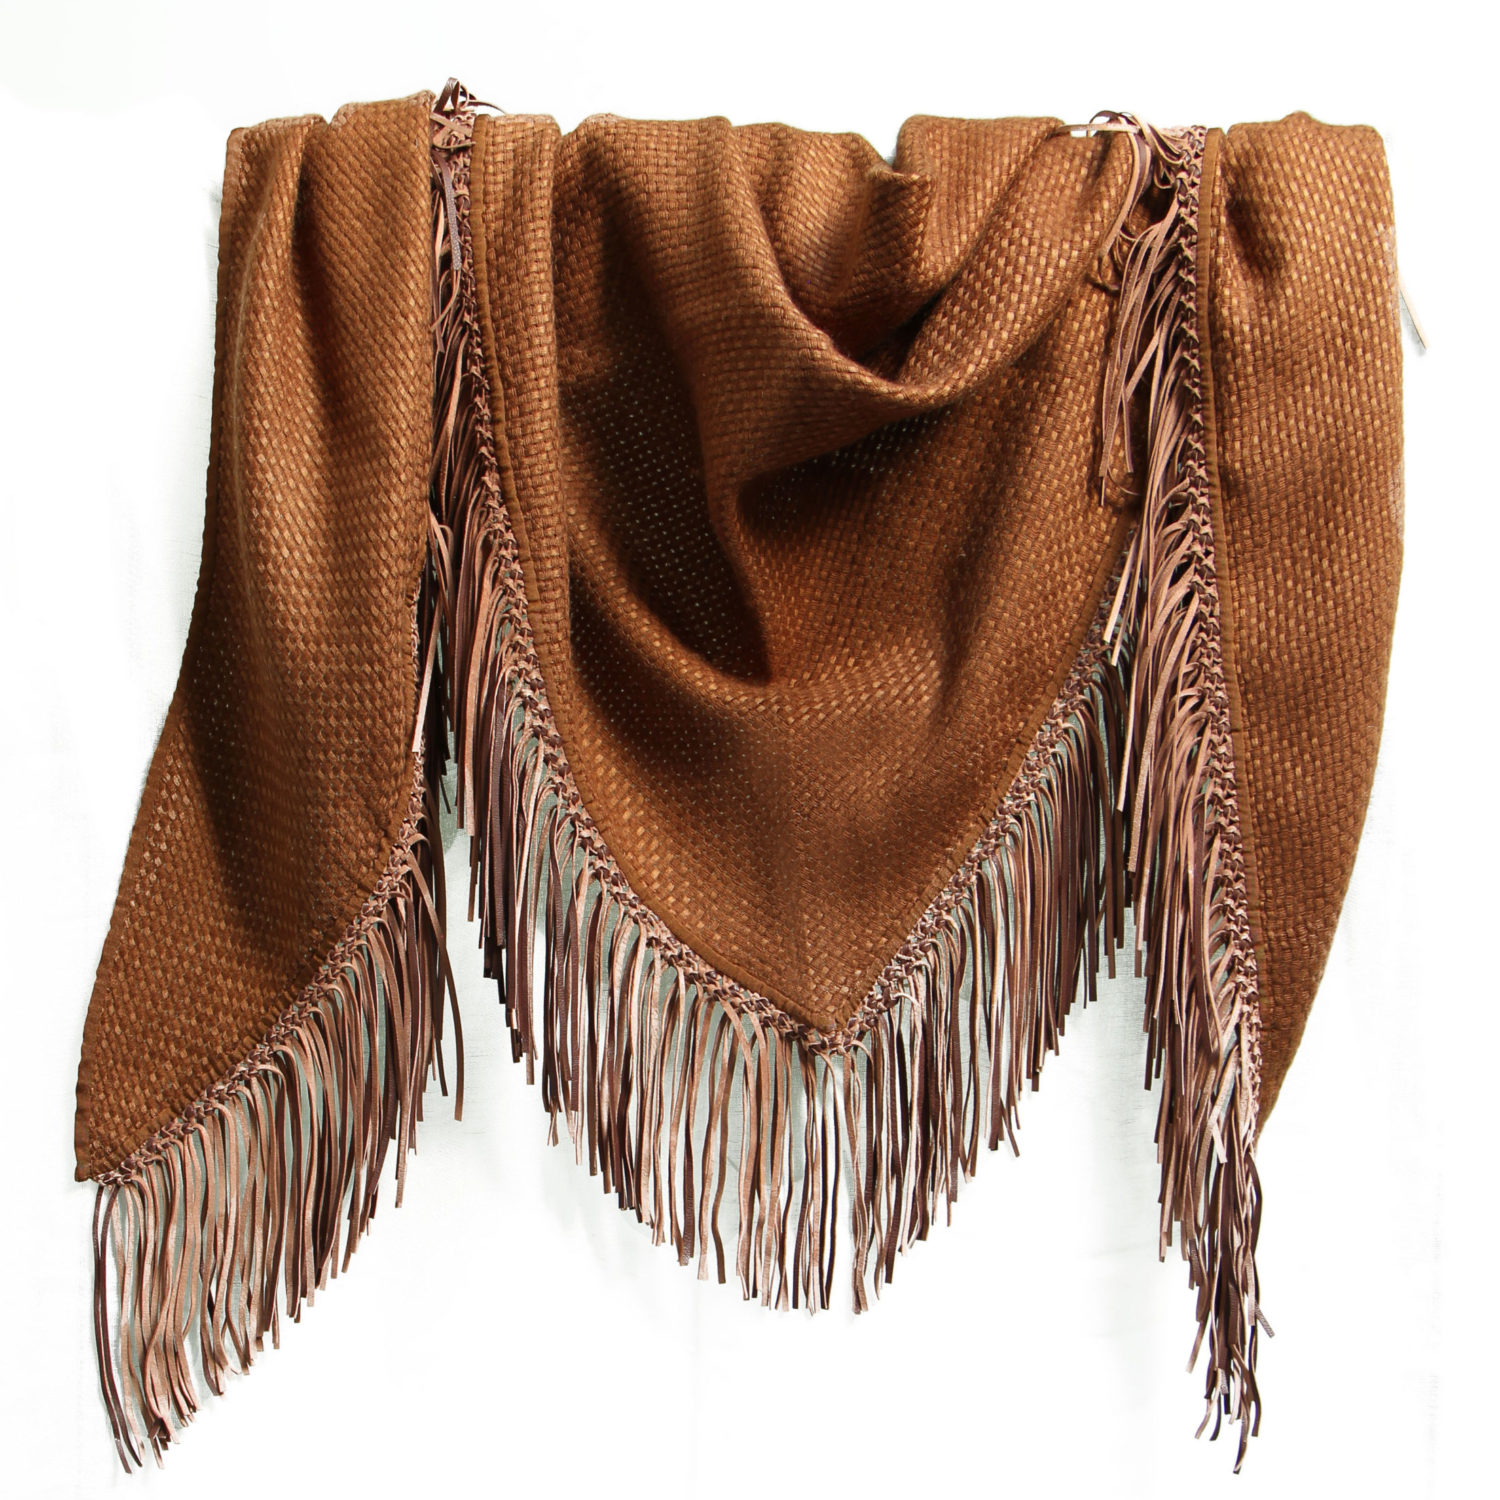 COGNAC TRIANGLE SCARF WITH LEATHER FRINGE